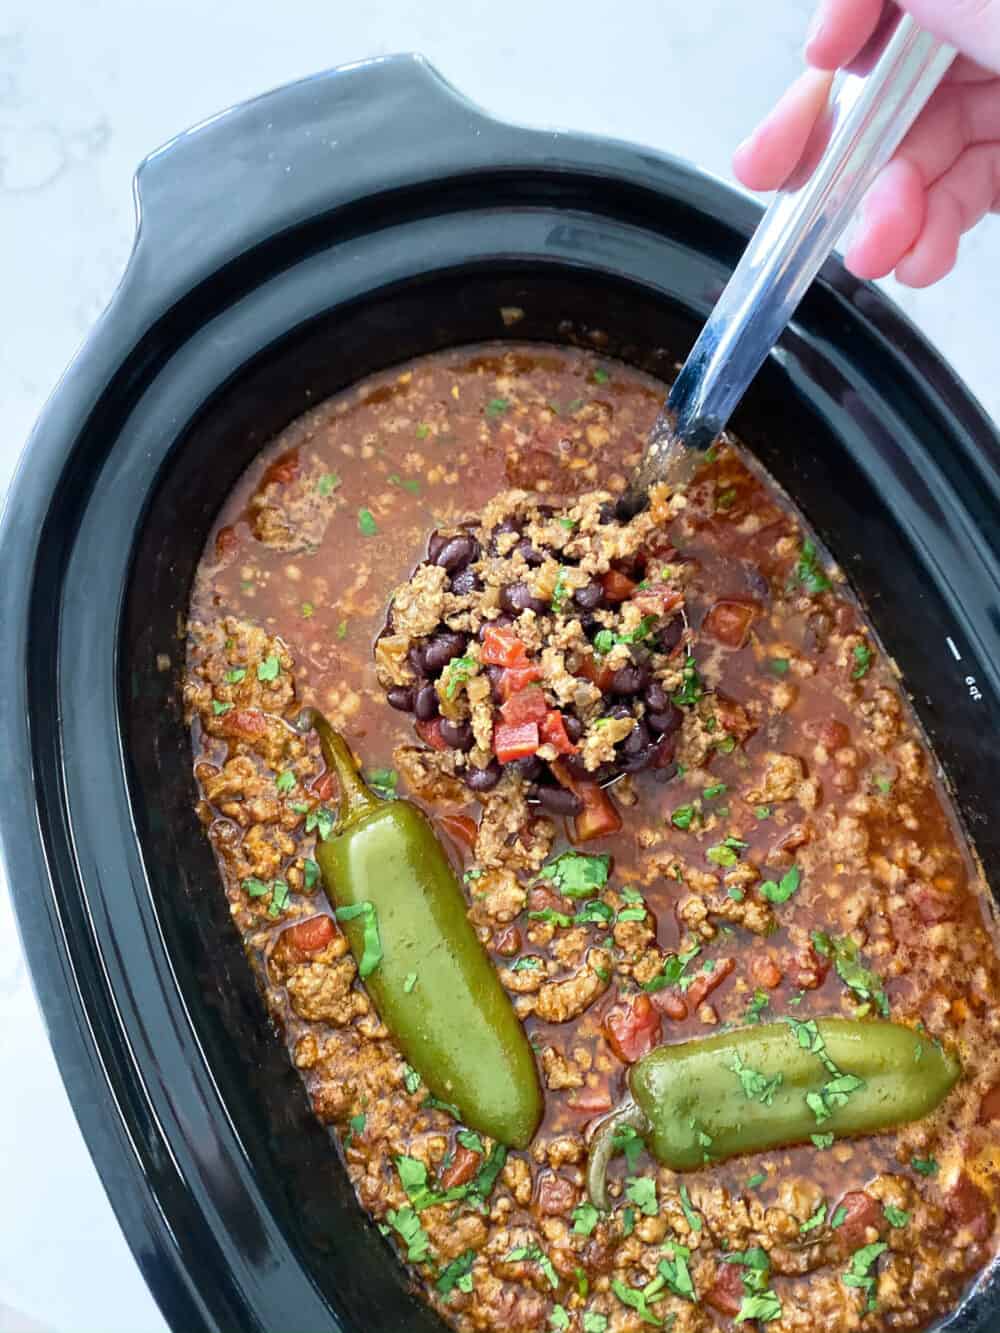 Easy Slow Cooker Chili Recipe | The